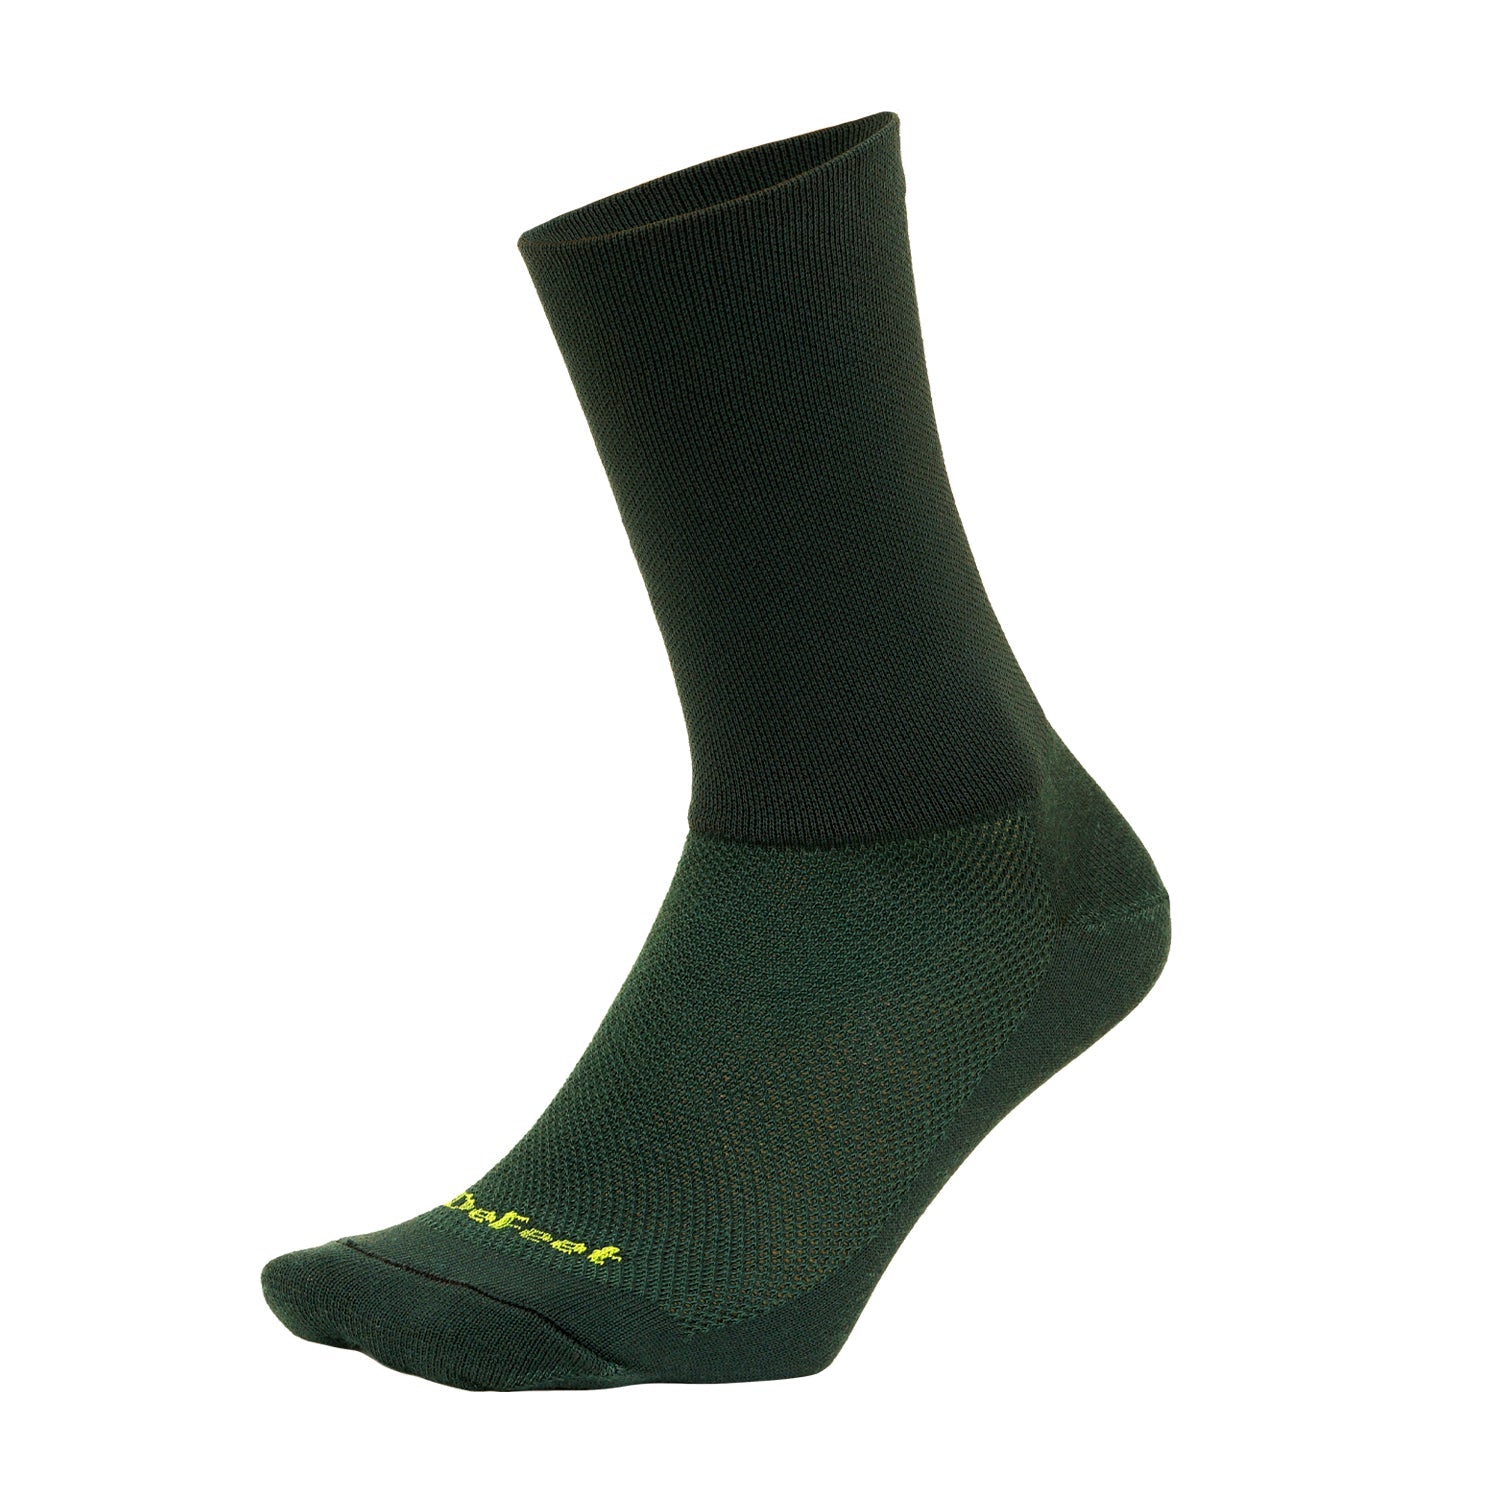 DeFeet Aireator 6" D-Logo cycling sock with 6" double cuff in forest green